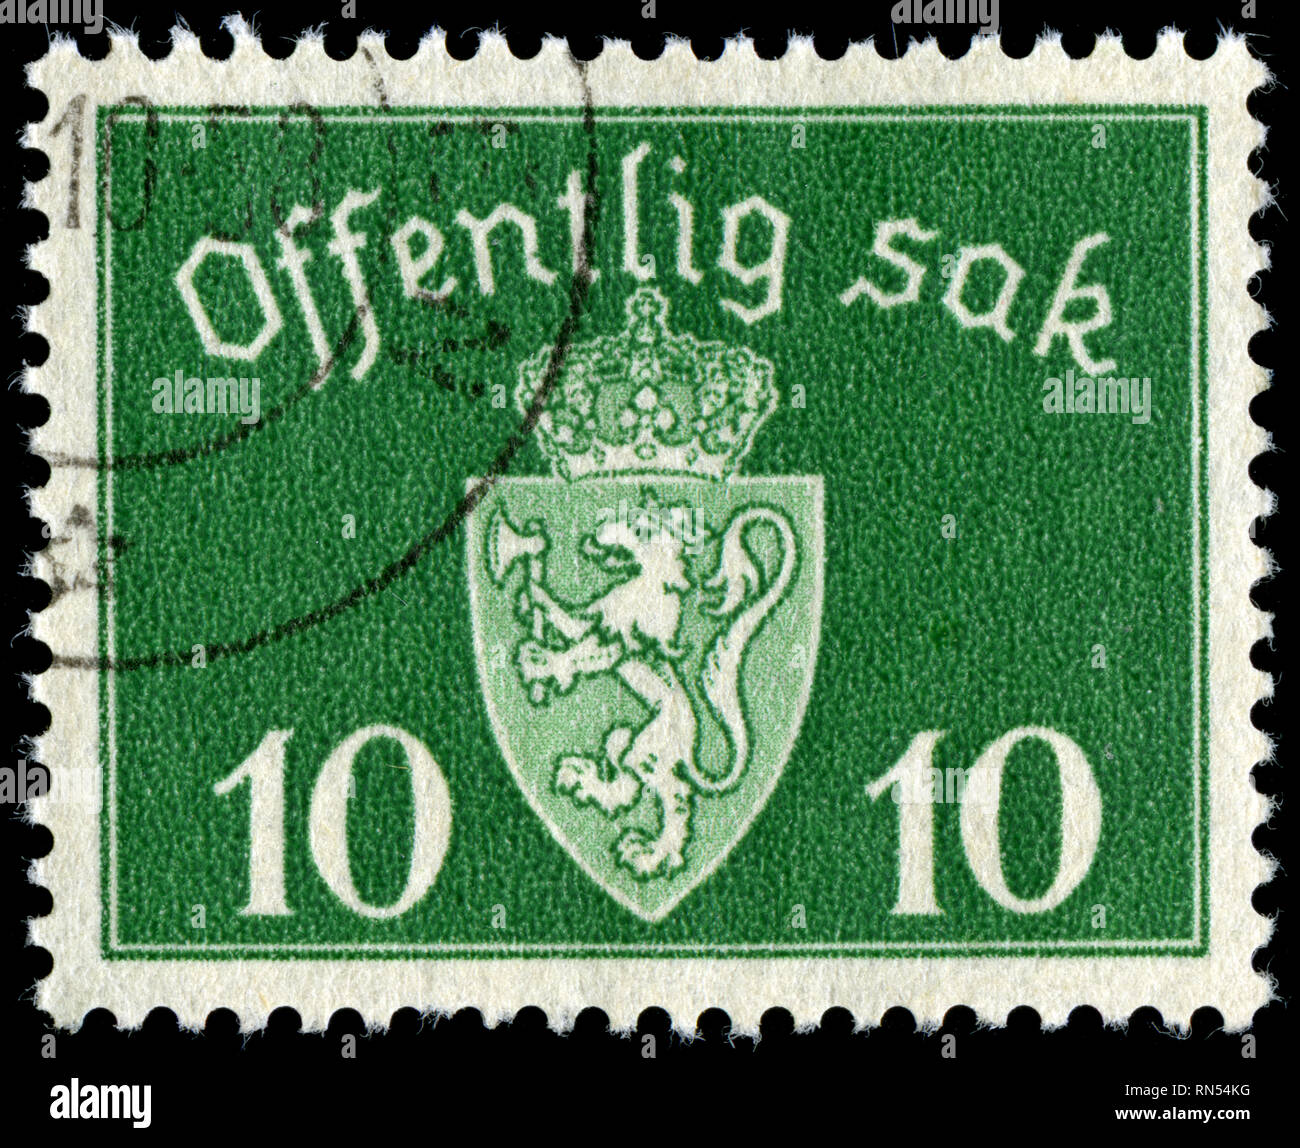 Postage stamp from Norway in the Offentlig Sak series issued in 1937 Stock  Photo - Alamy